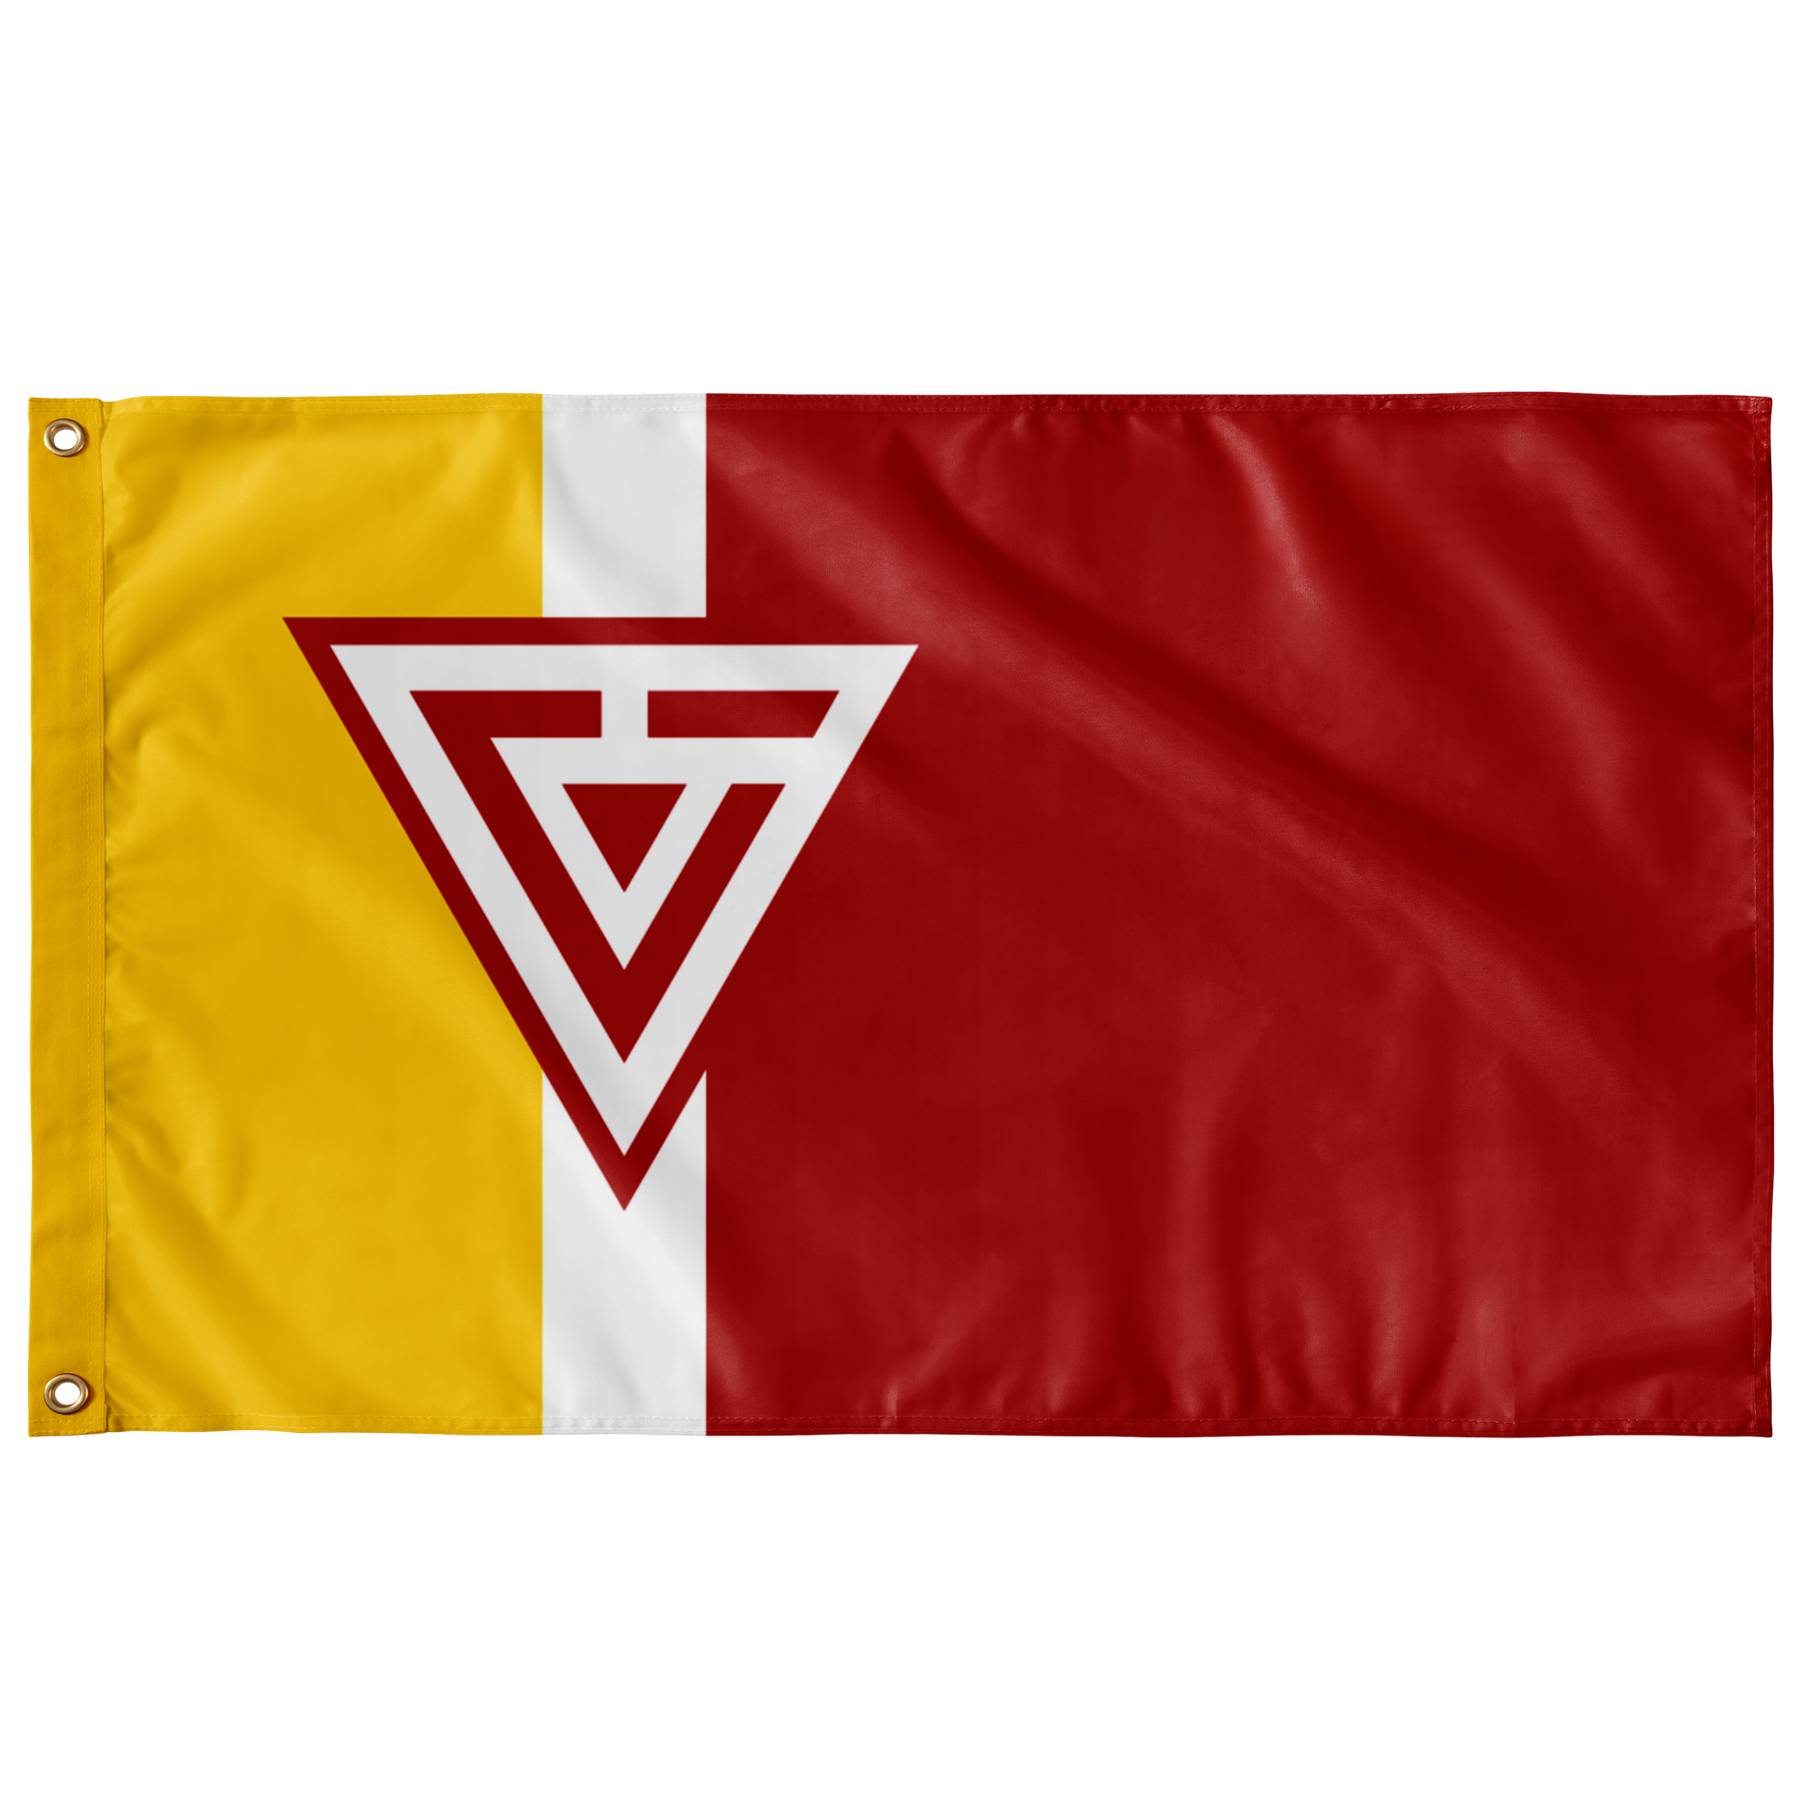 Pan-Asian Commissariat Flag – The Templin Commissary